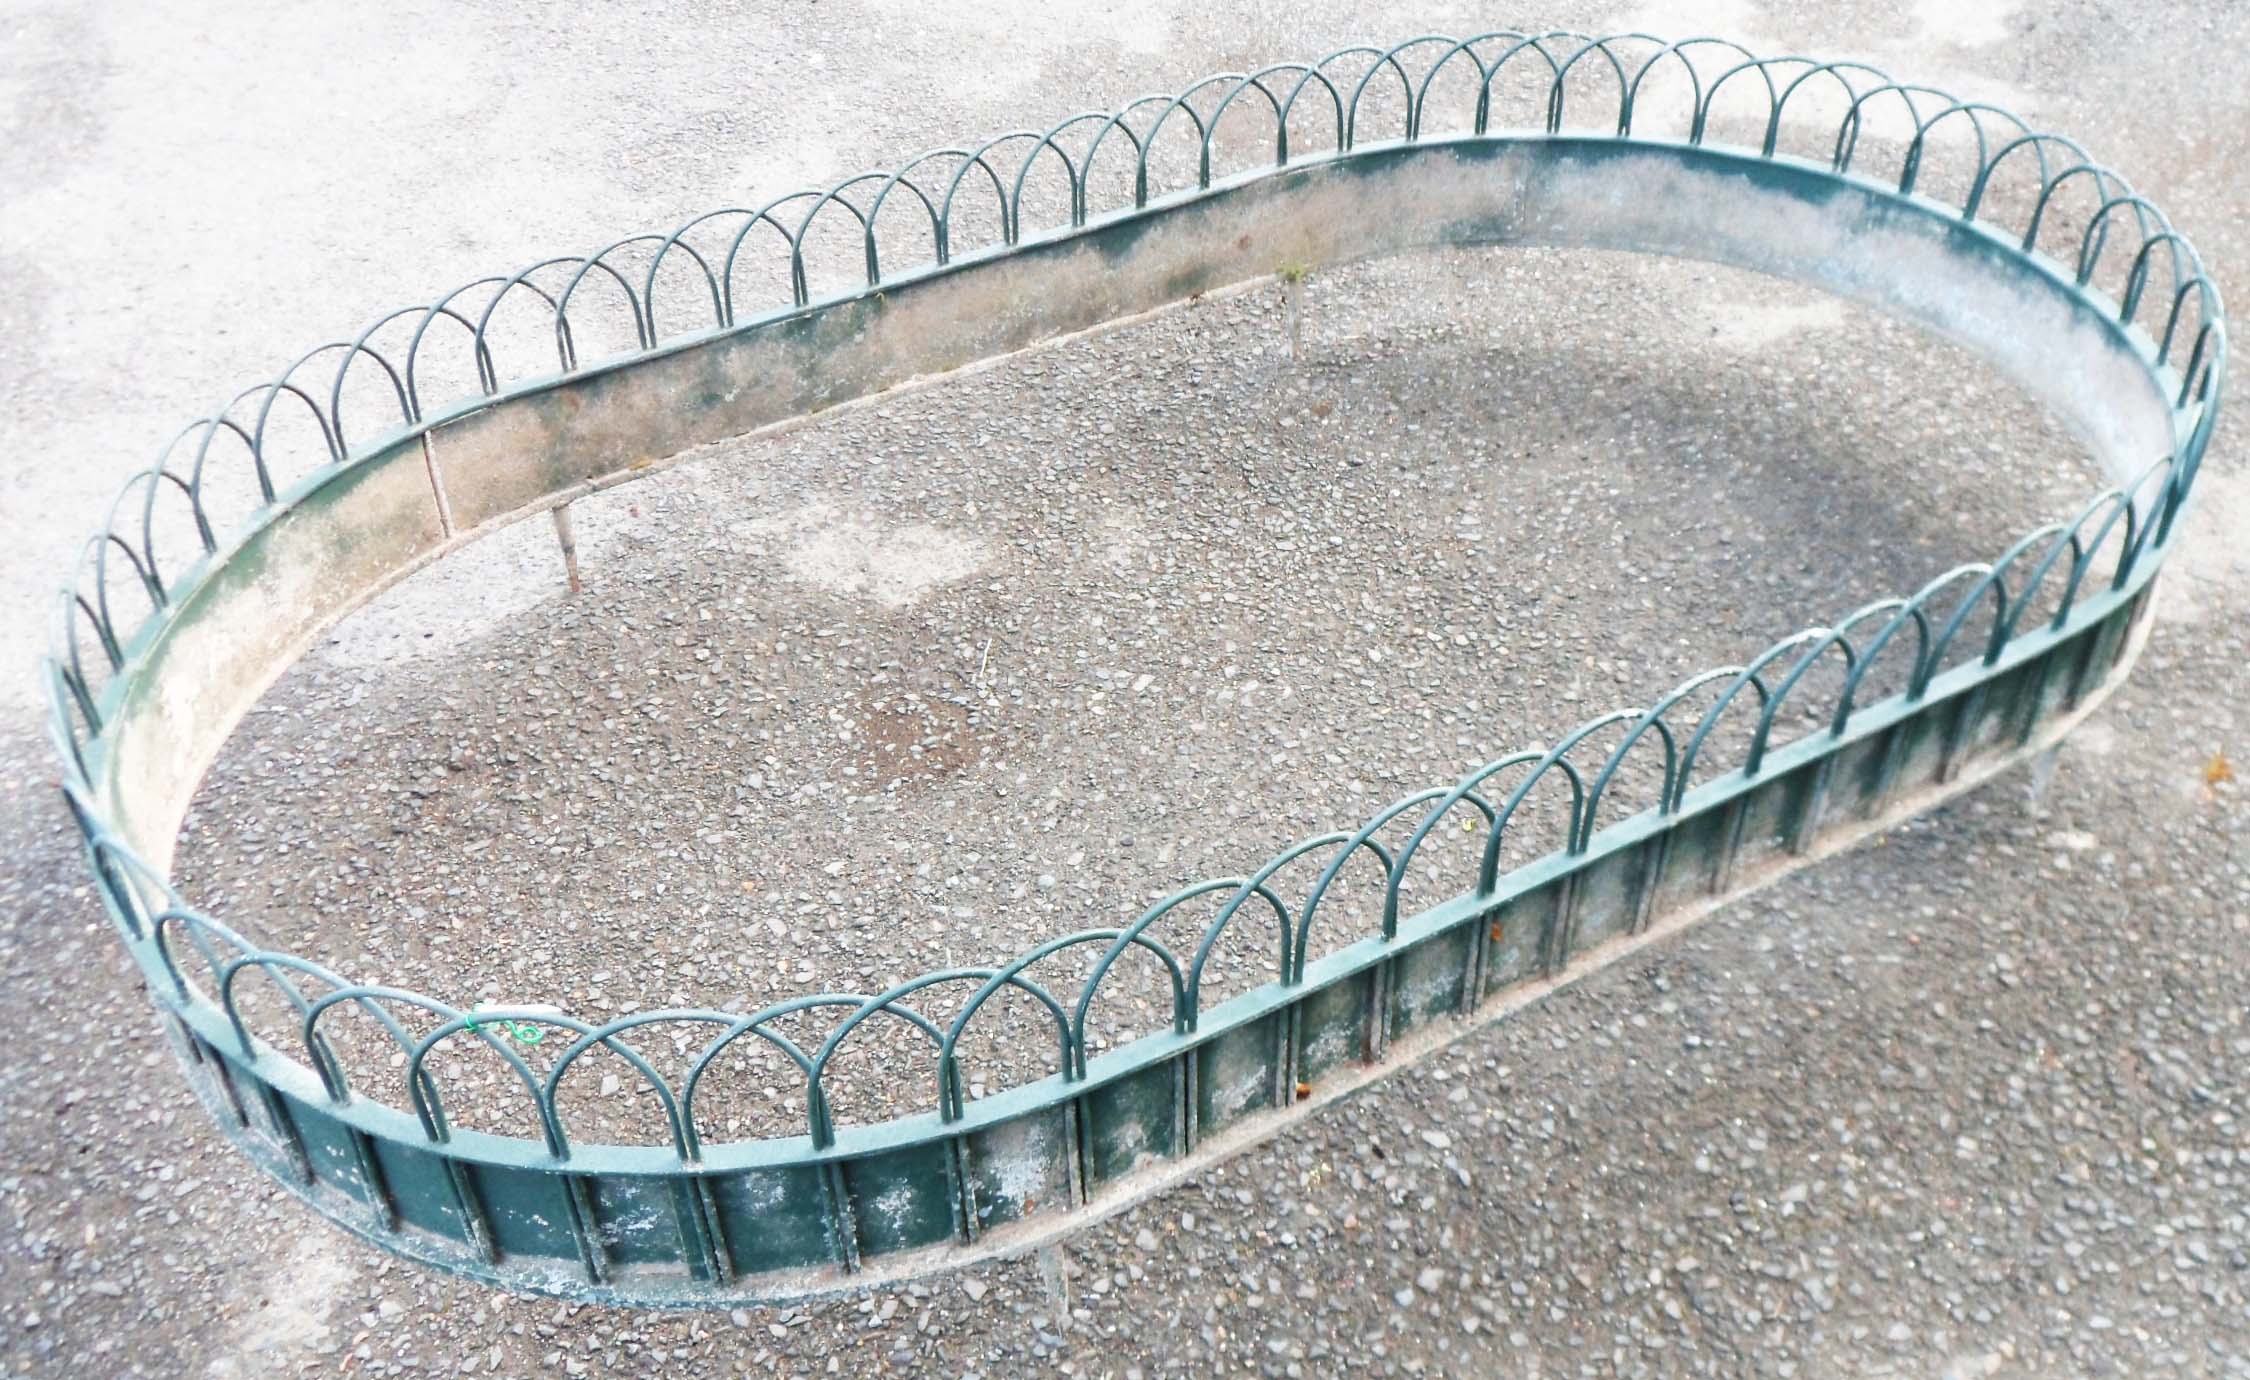 A 6' 1" 20th Century painted metal decorative garden border of oval design with arched wirework